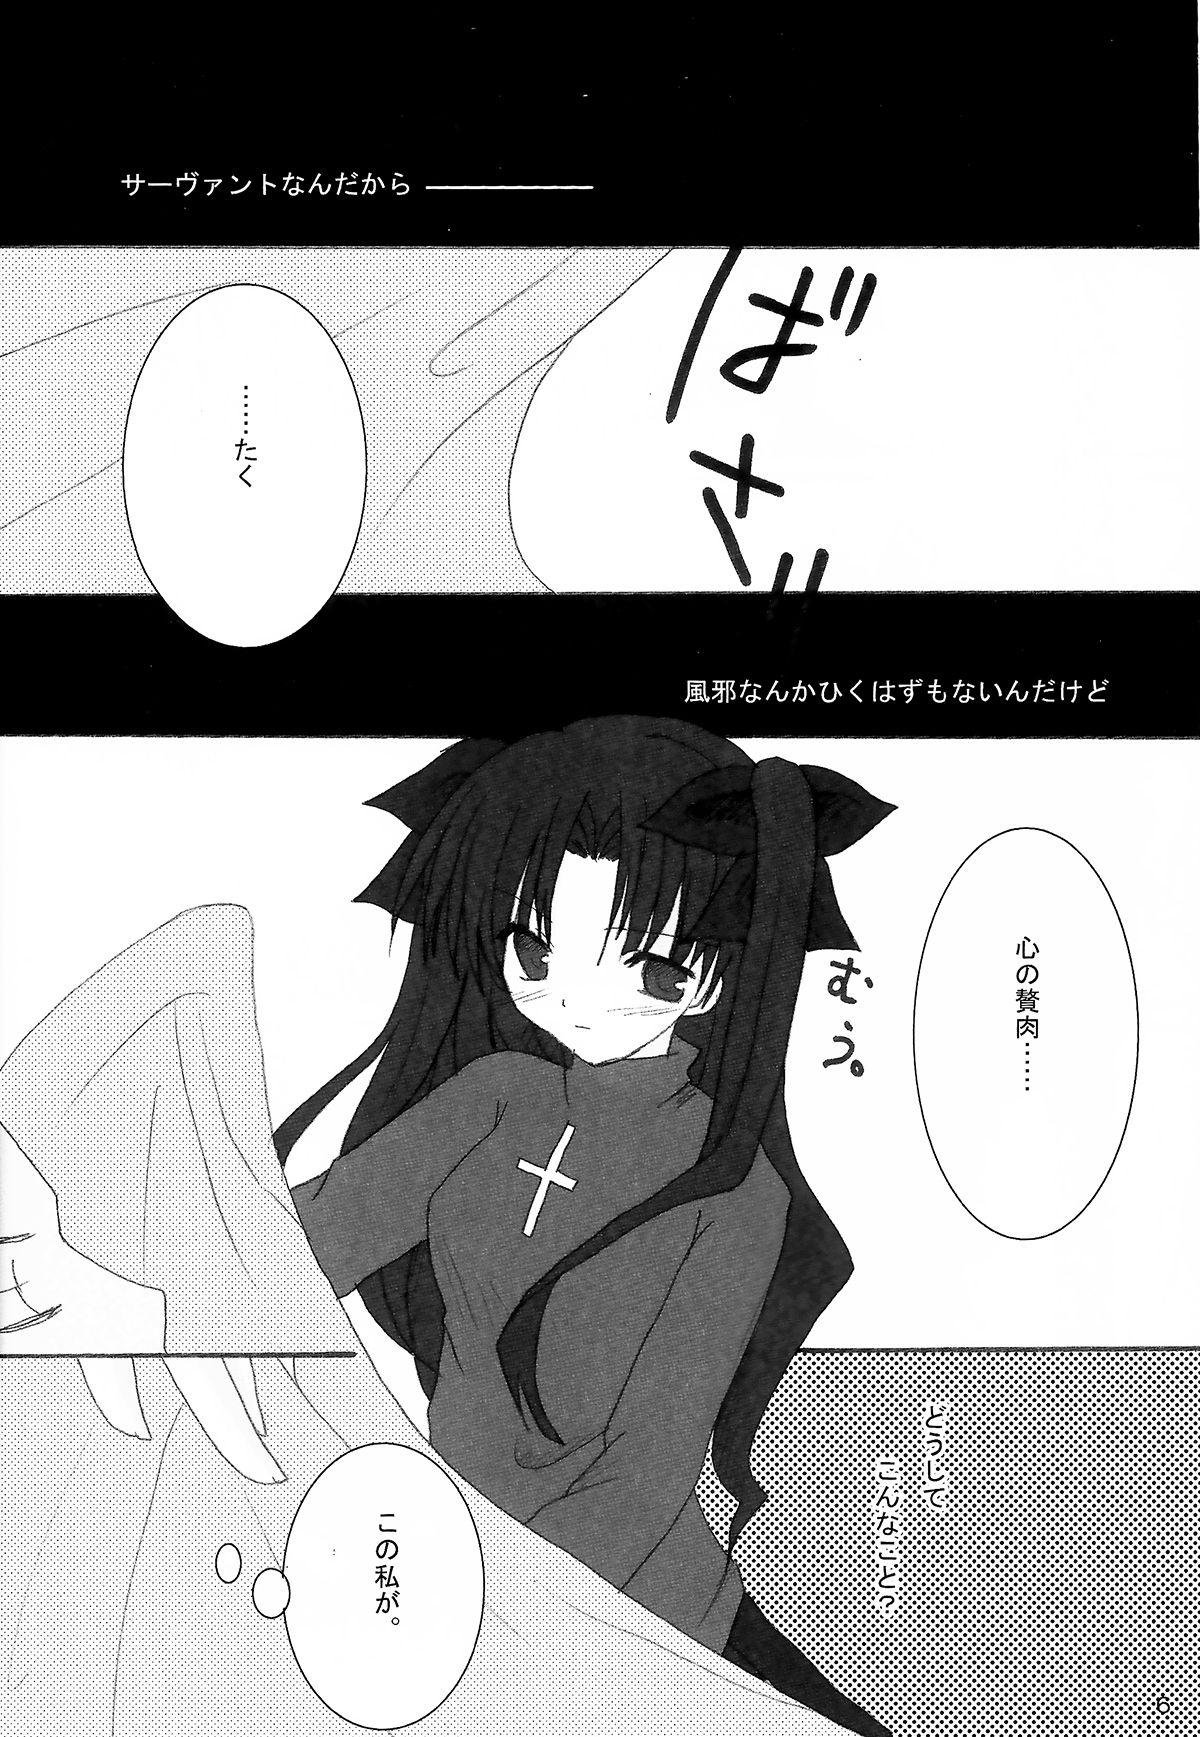 Submission Infinite Emotion - Fate stay night Alone - Page 4